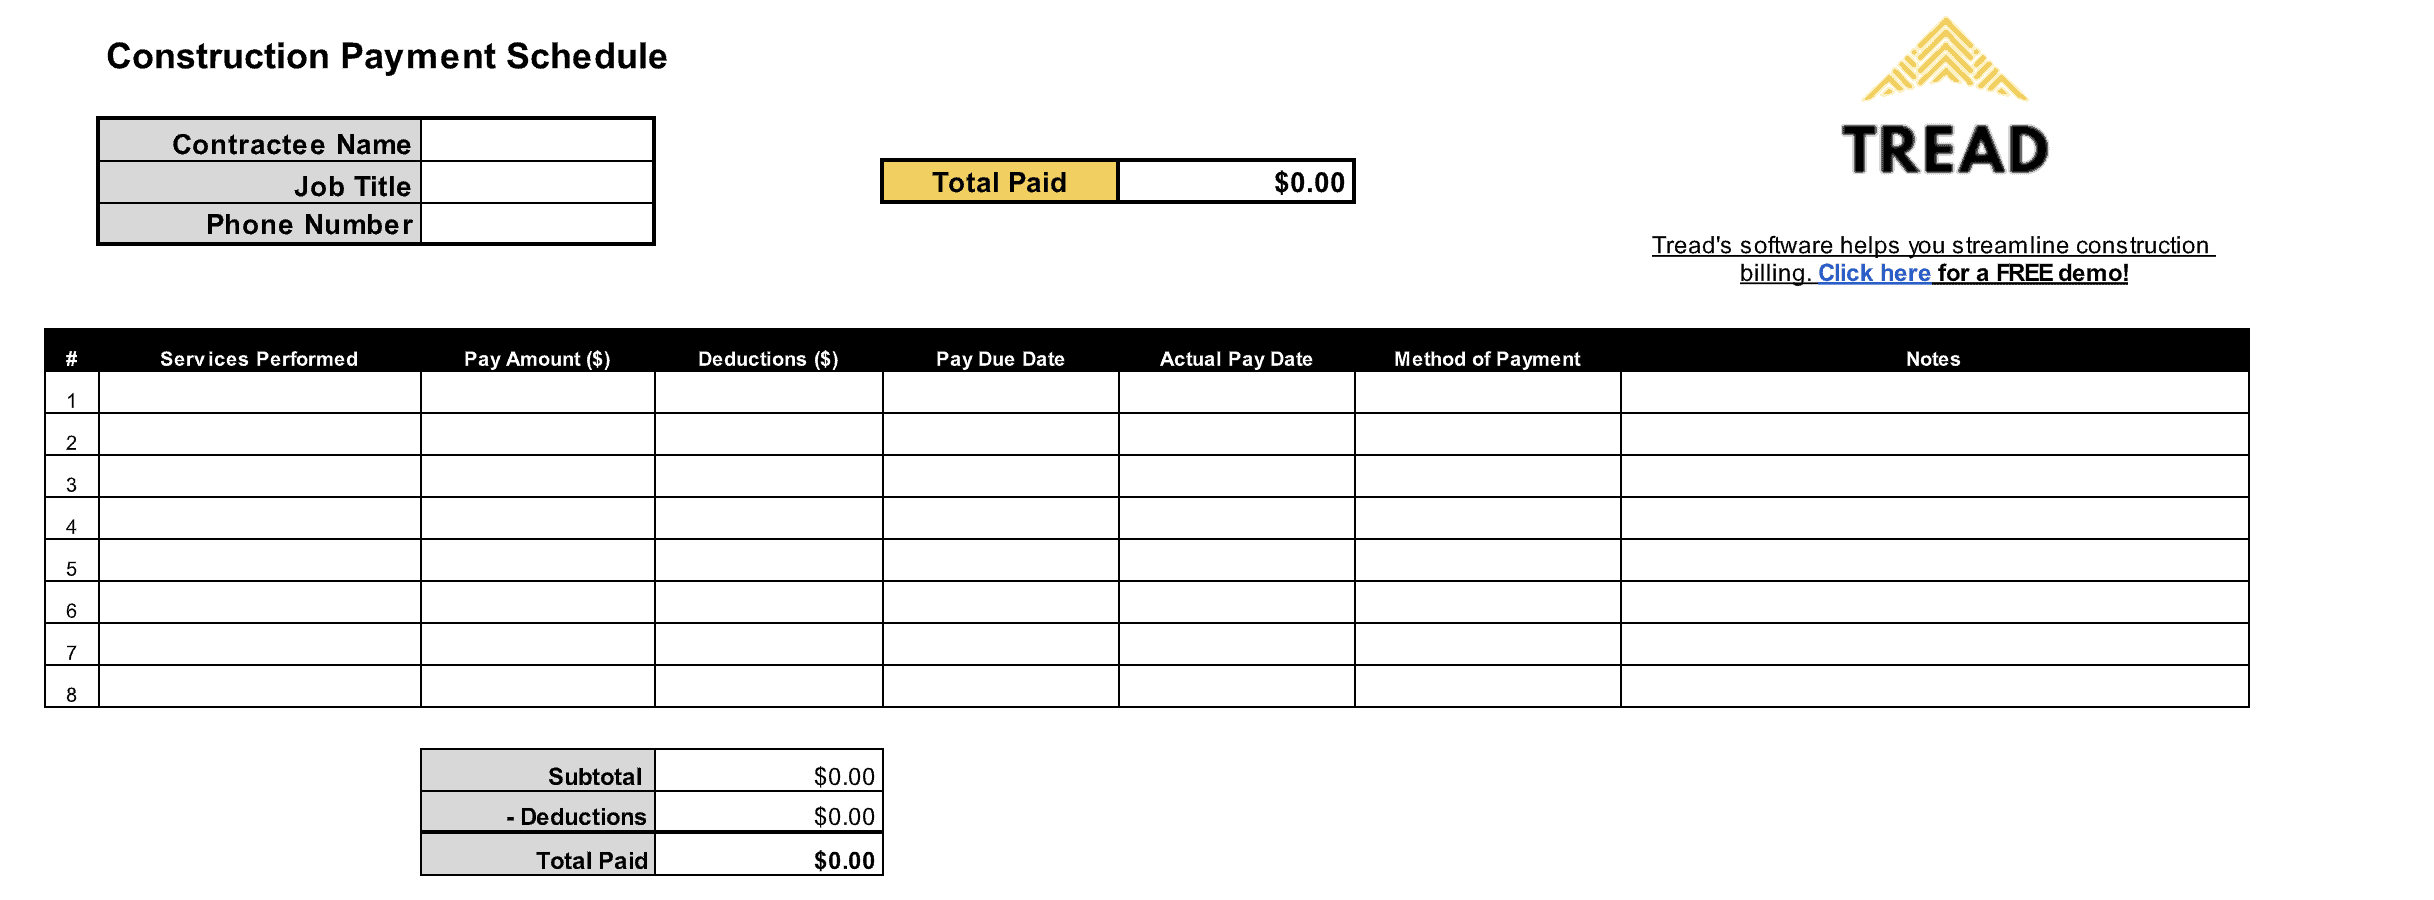 Construction Payment Schedule Template Free Download